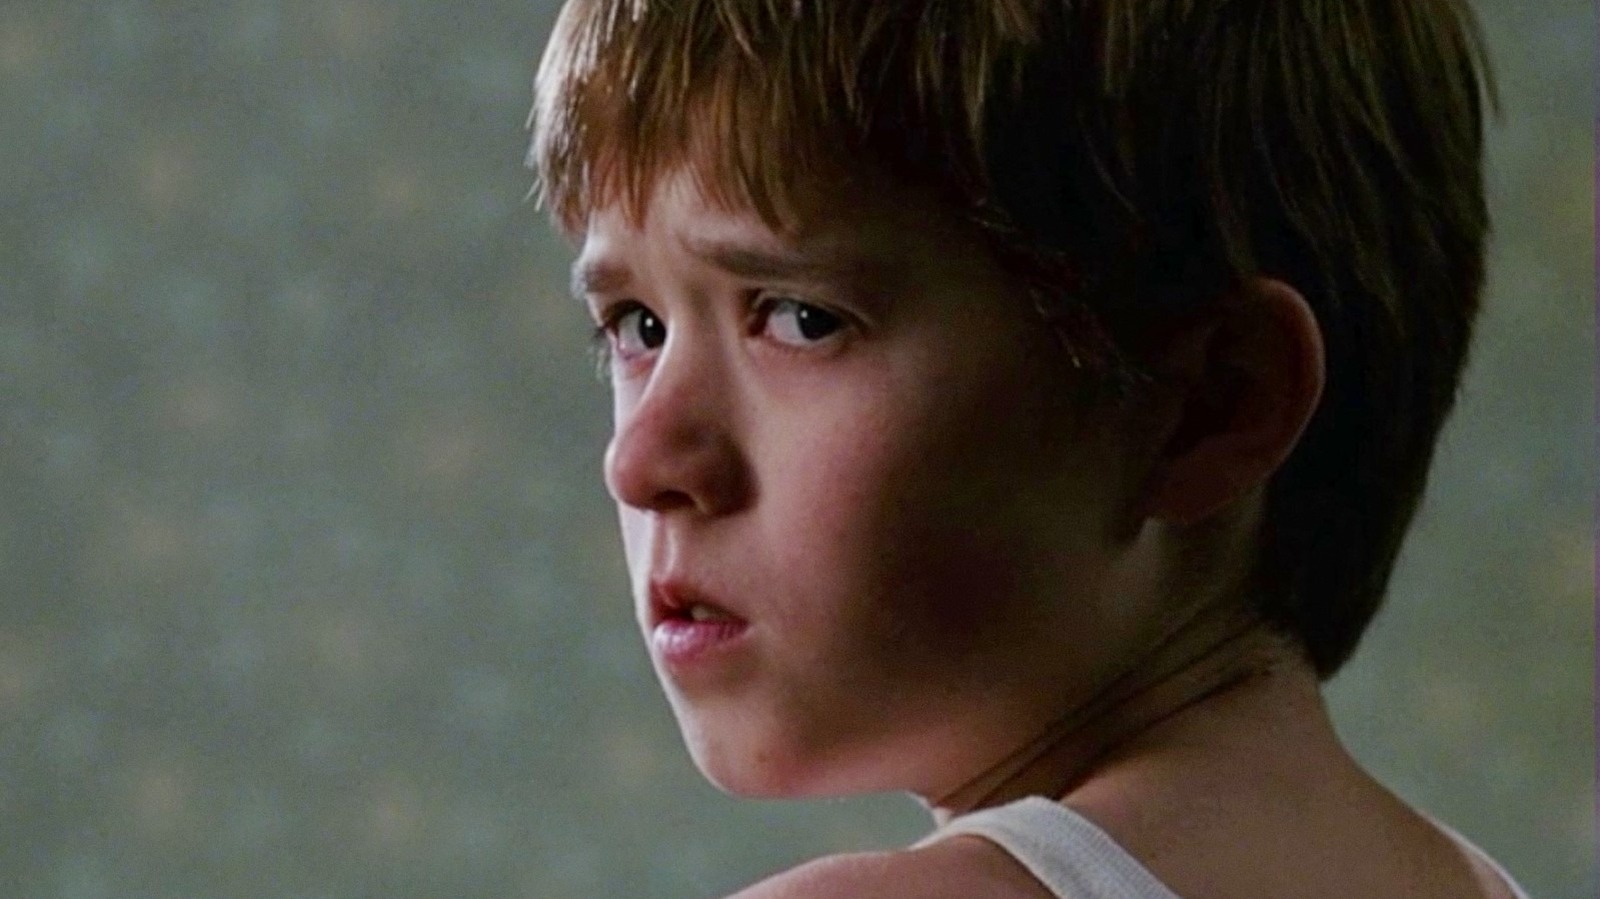 One Of The Scariest Scenes In The Sixth Sense Validates Kids' Fears